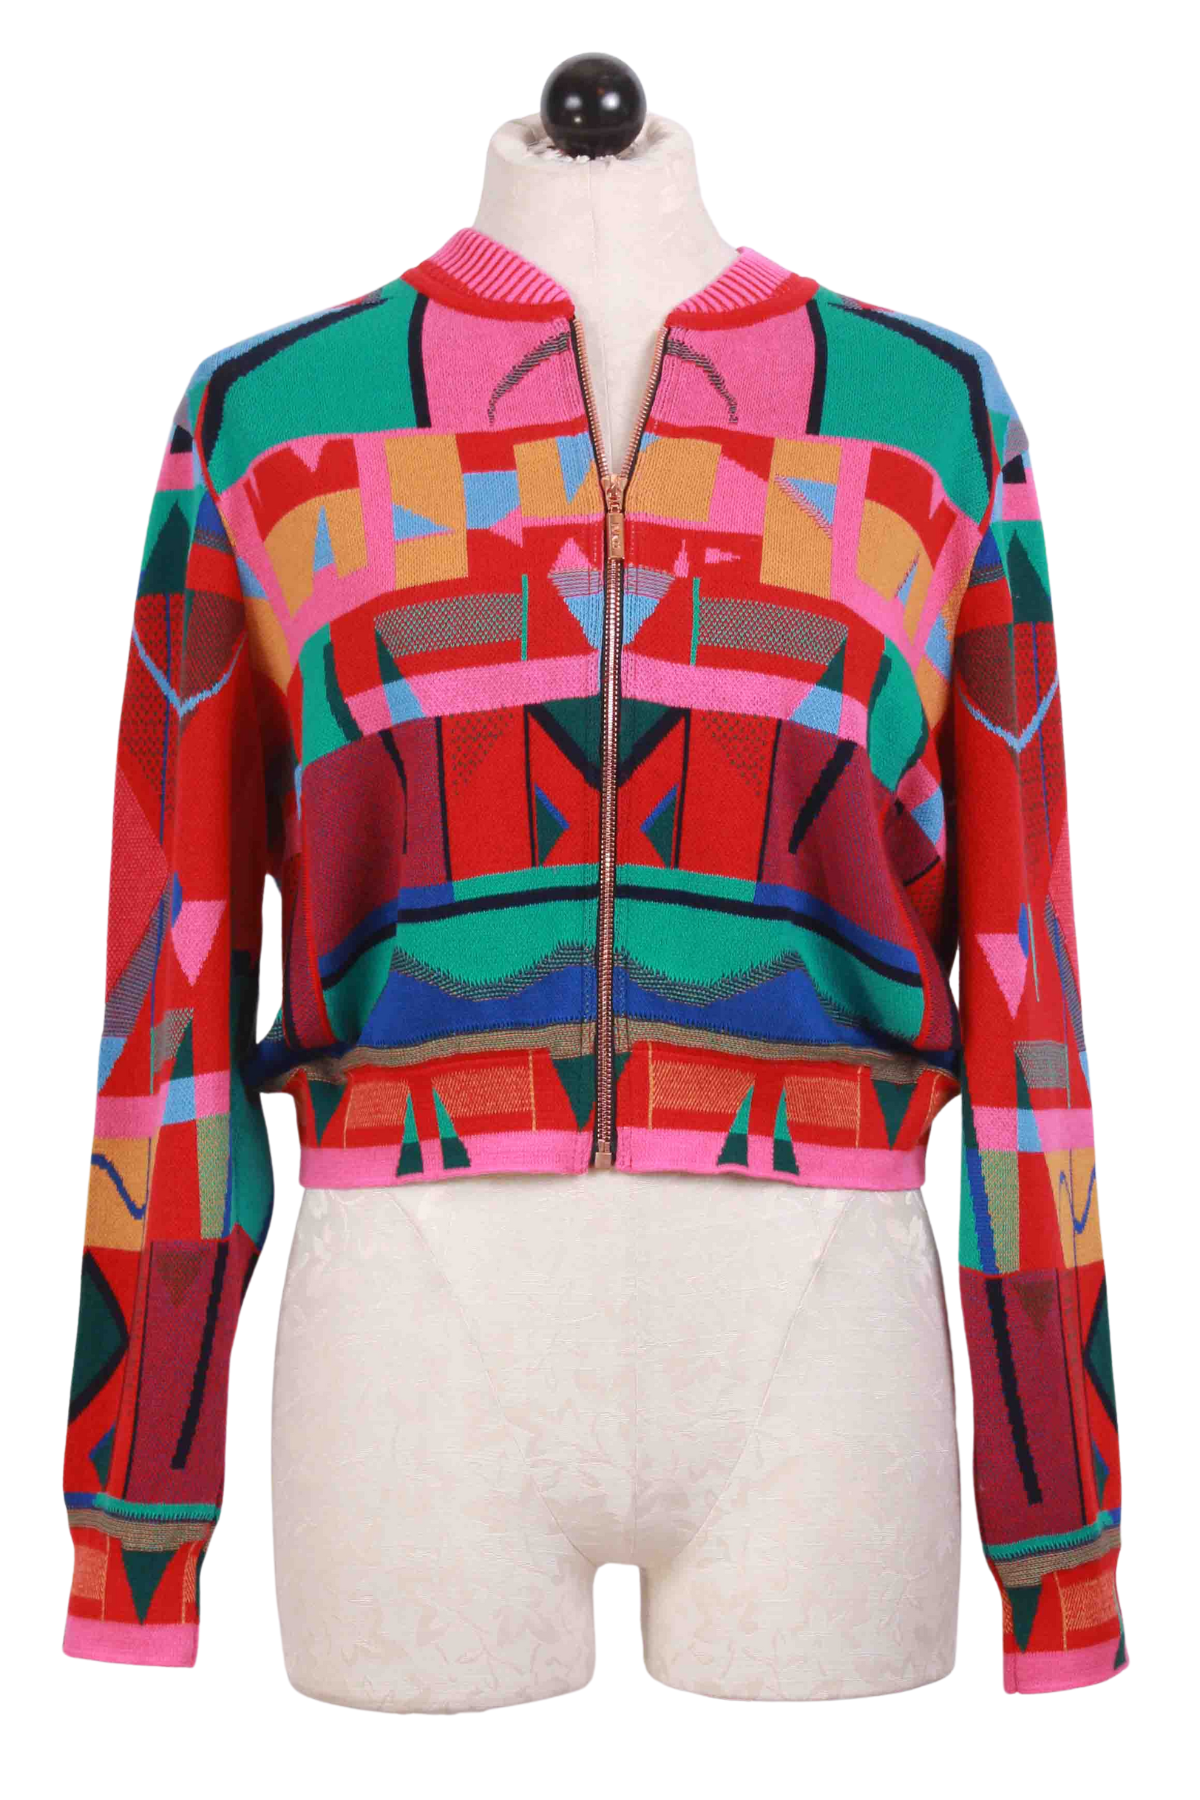  Cherry Multi Abstract Pattern Bomber Jacket